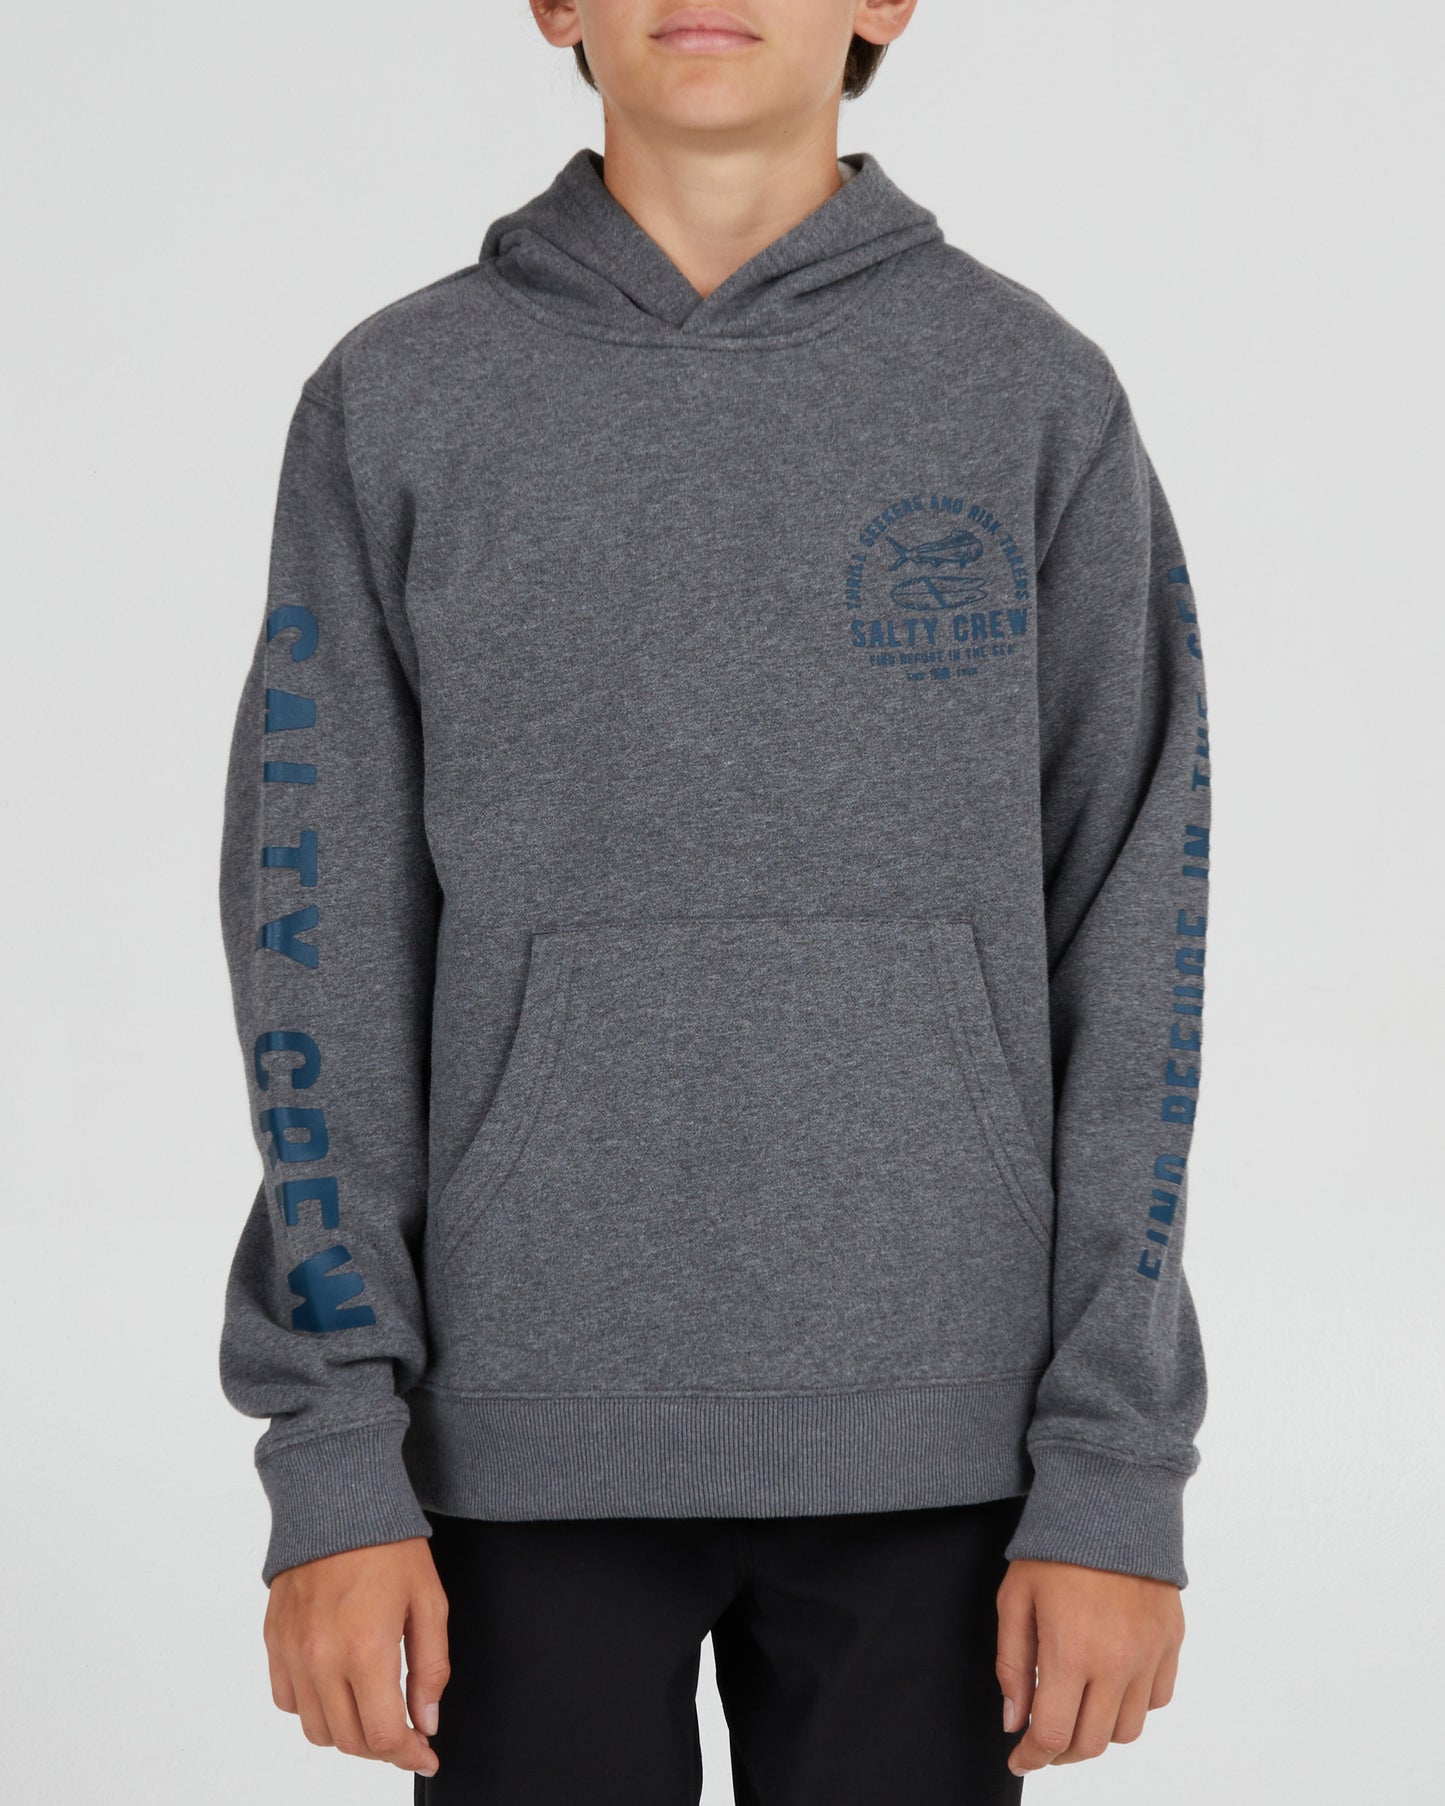 On body front of the Lateral Line Boys Gunmetal Heather Hooded Fleece